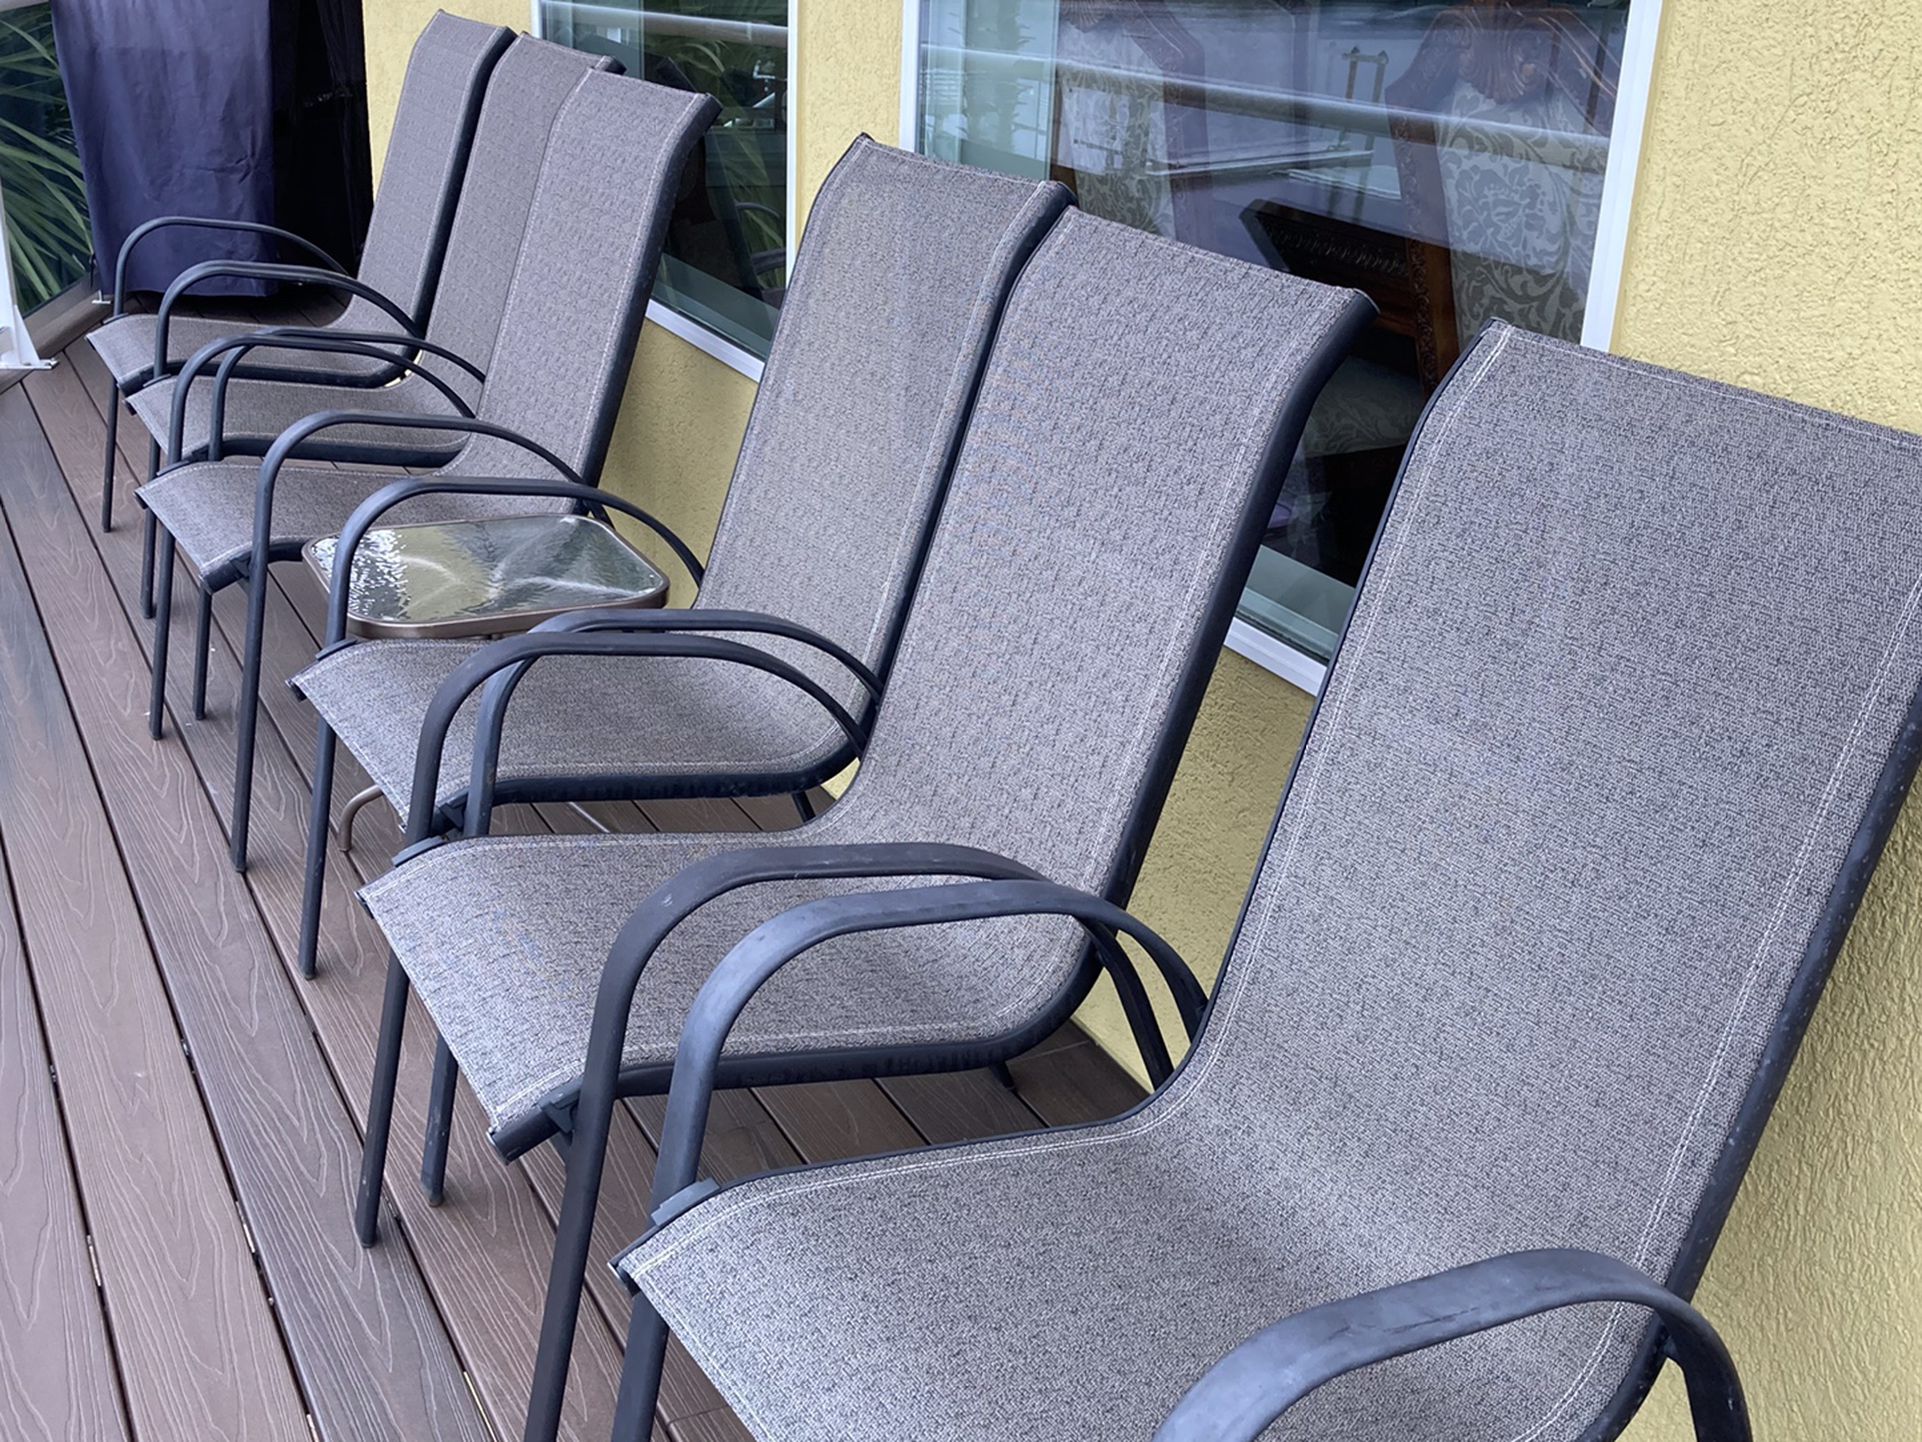 8 chairs w/small table. Great condition $15 each chair. $115 for all chairs and table